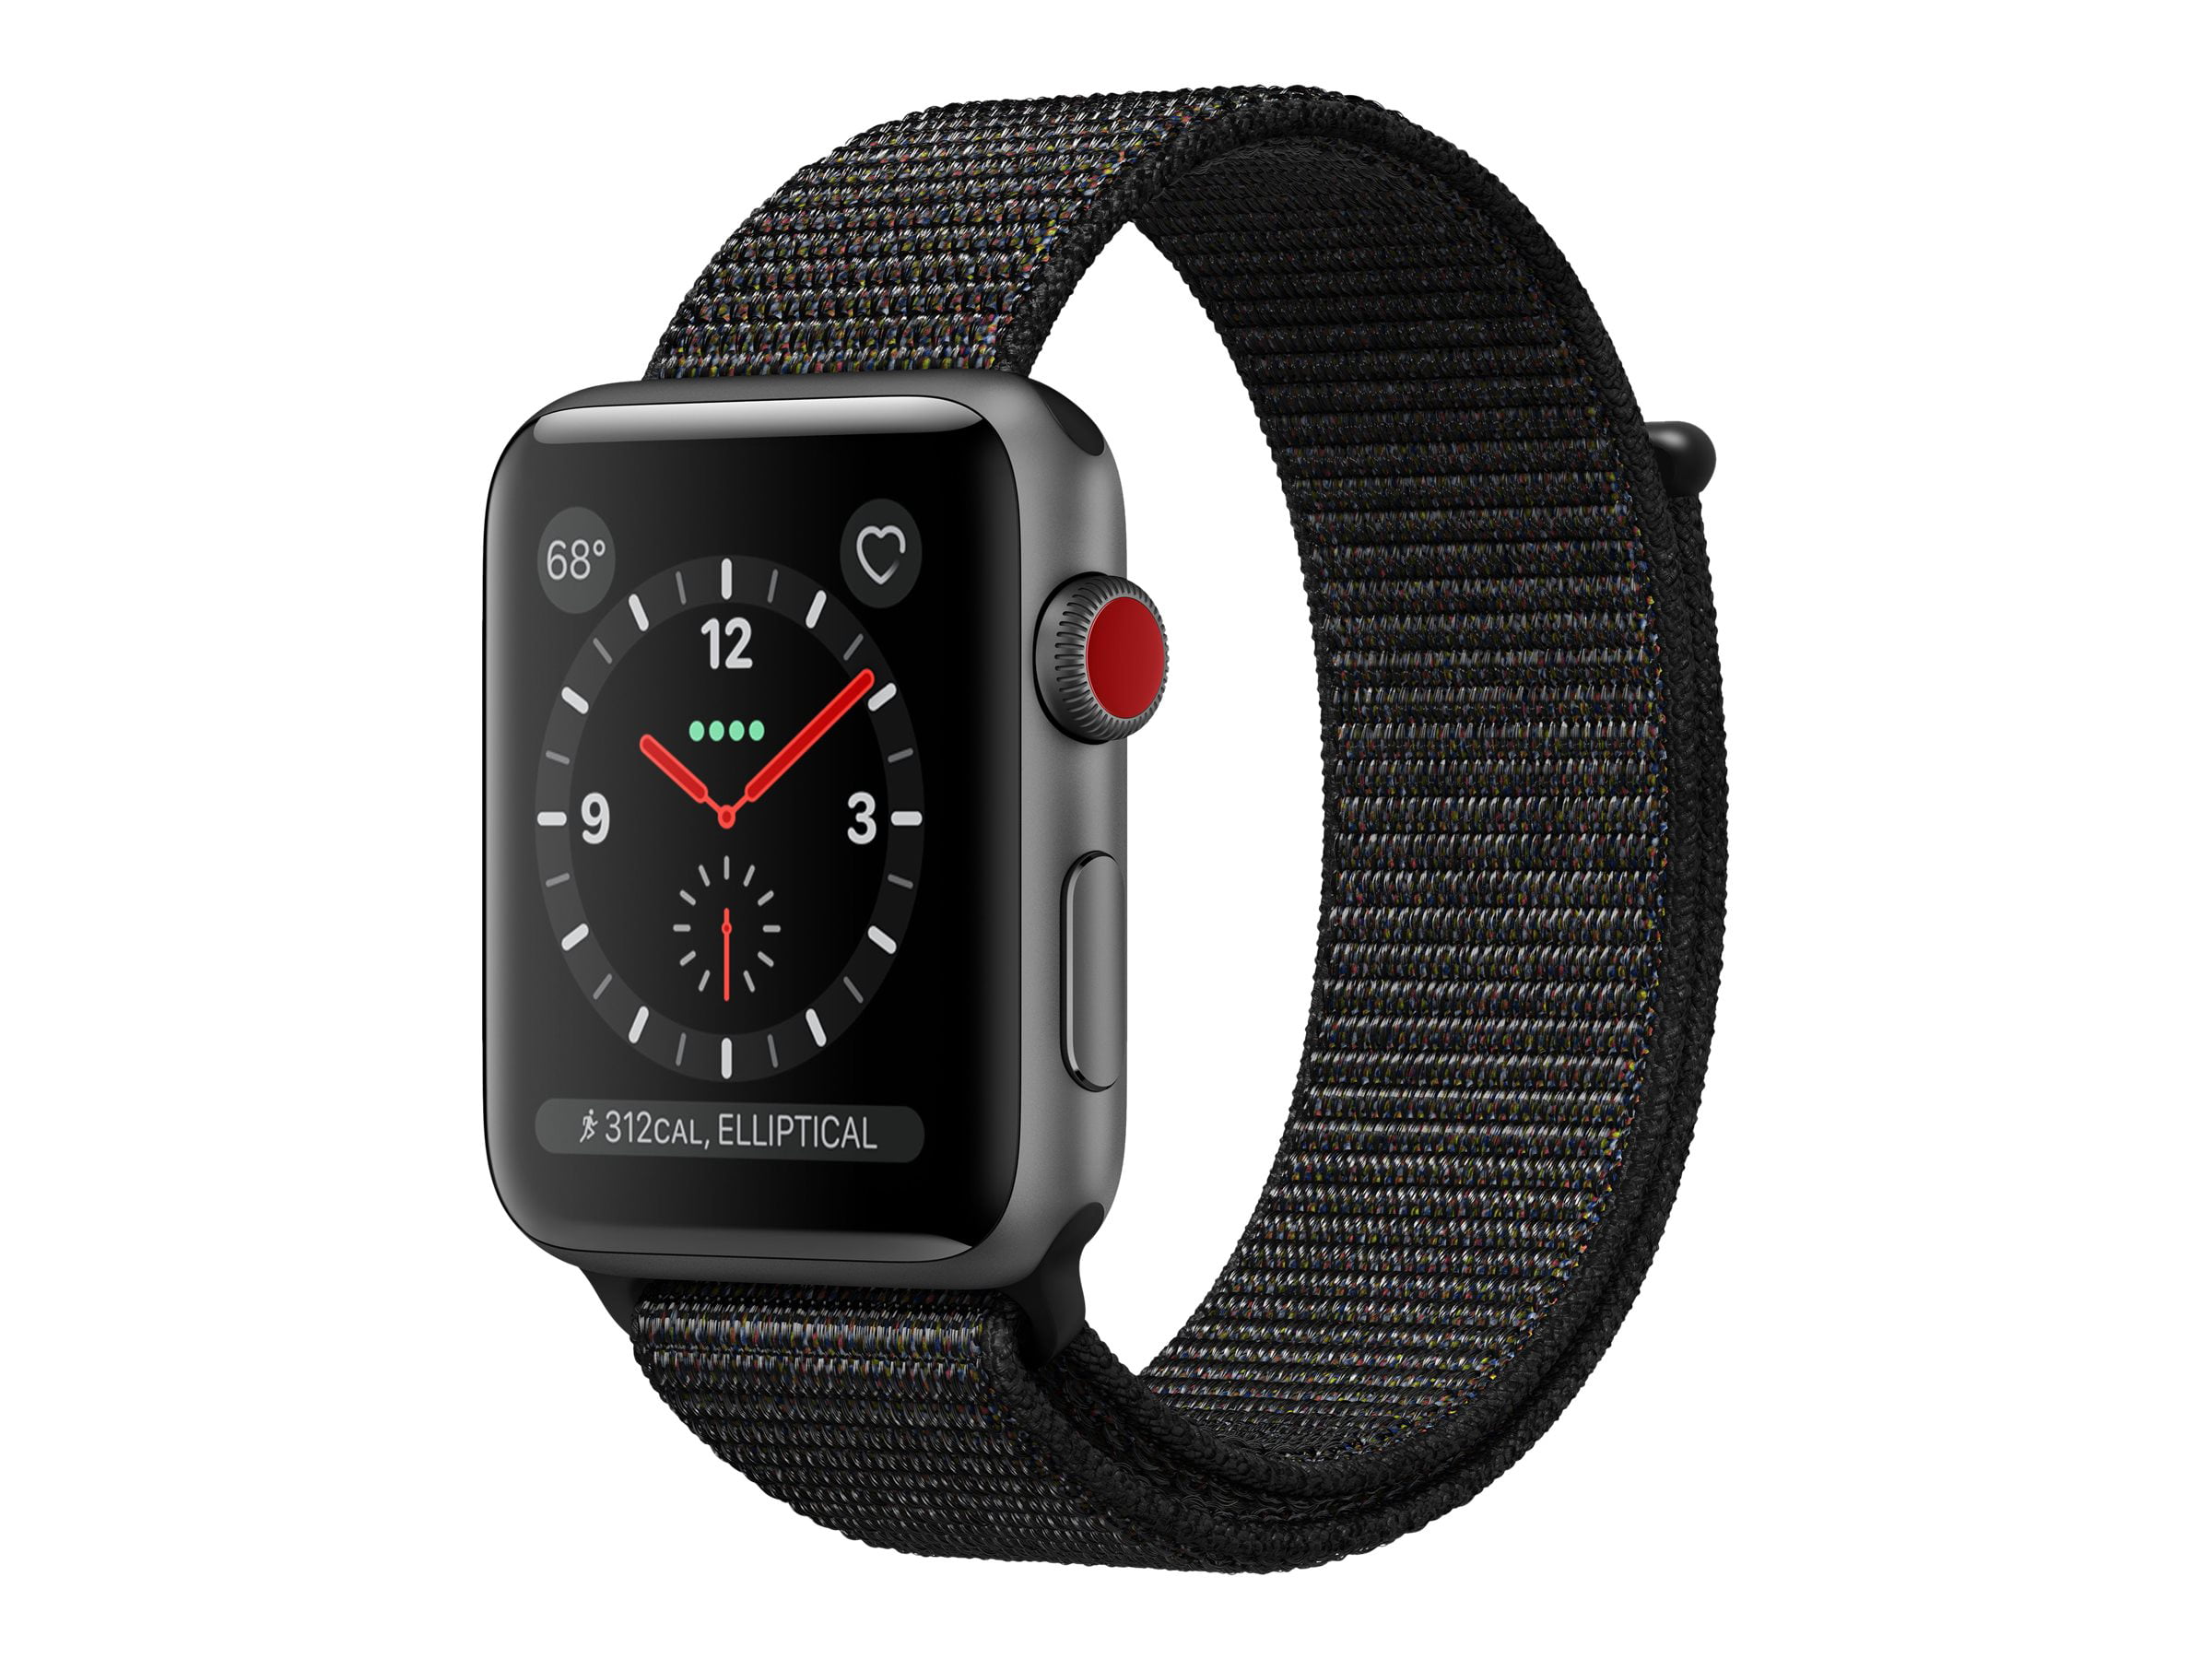 Apple Watch Series 3 (GPS + Cellular) - 42 mm - space gray aluminum